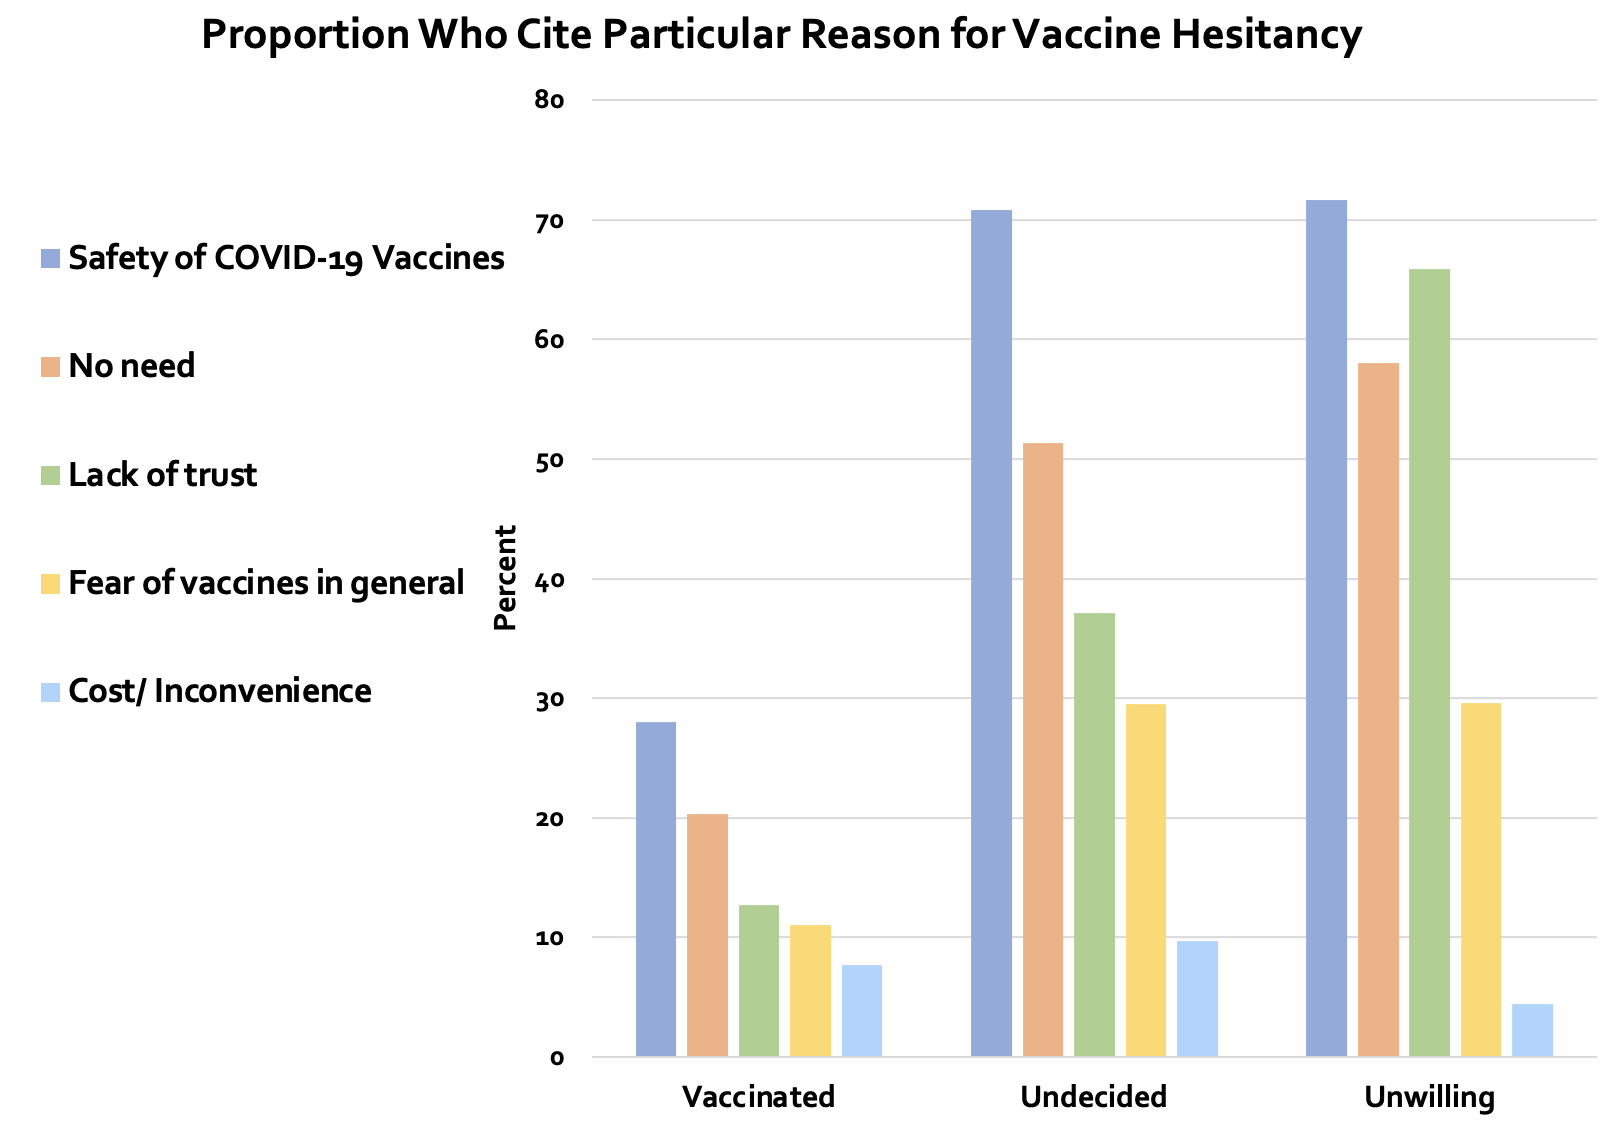 Figure 1a Proportion Who Cite Particular Reason for Vaccine Hesitancy 